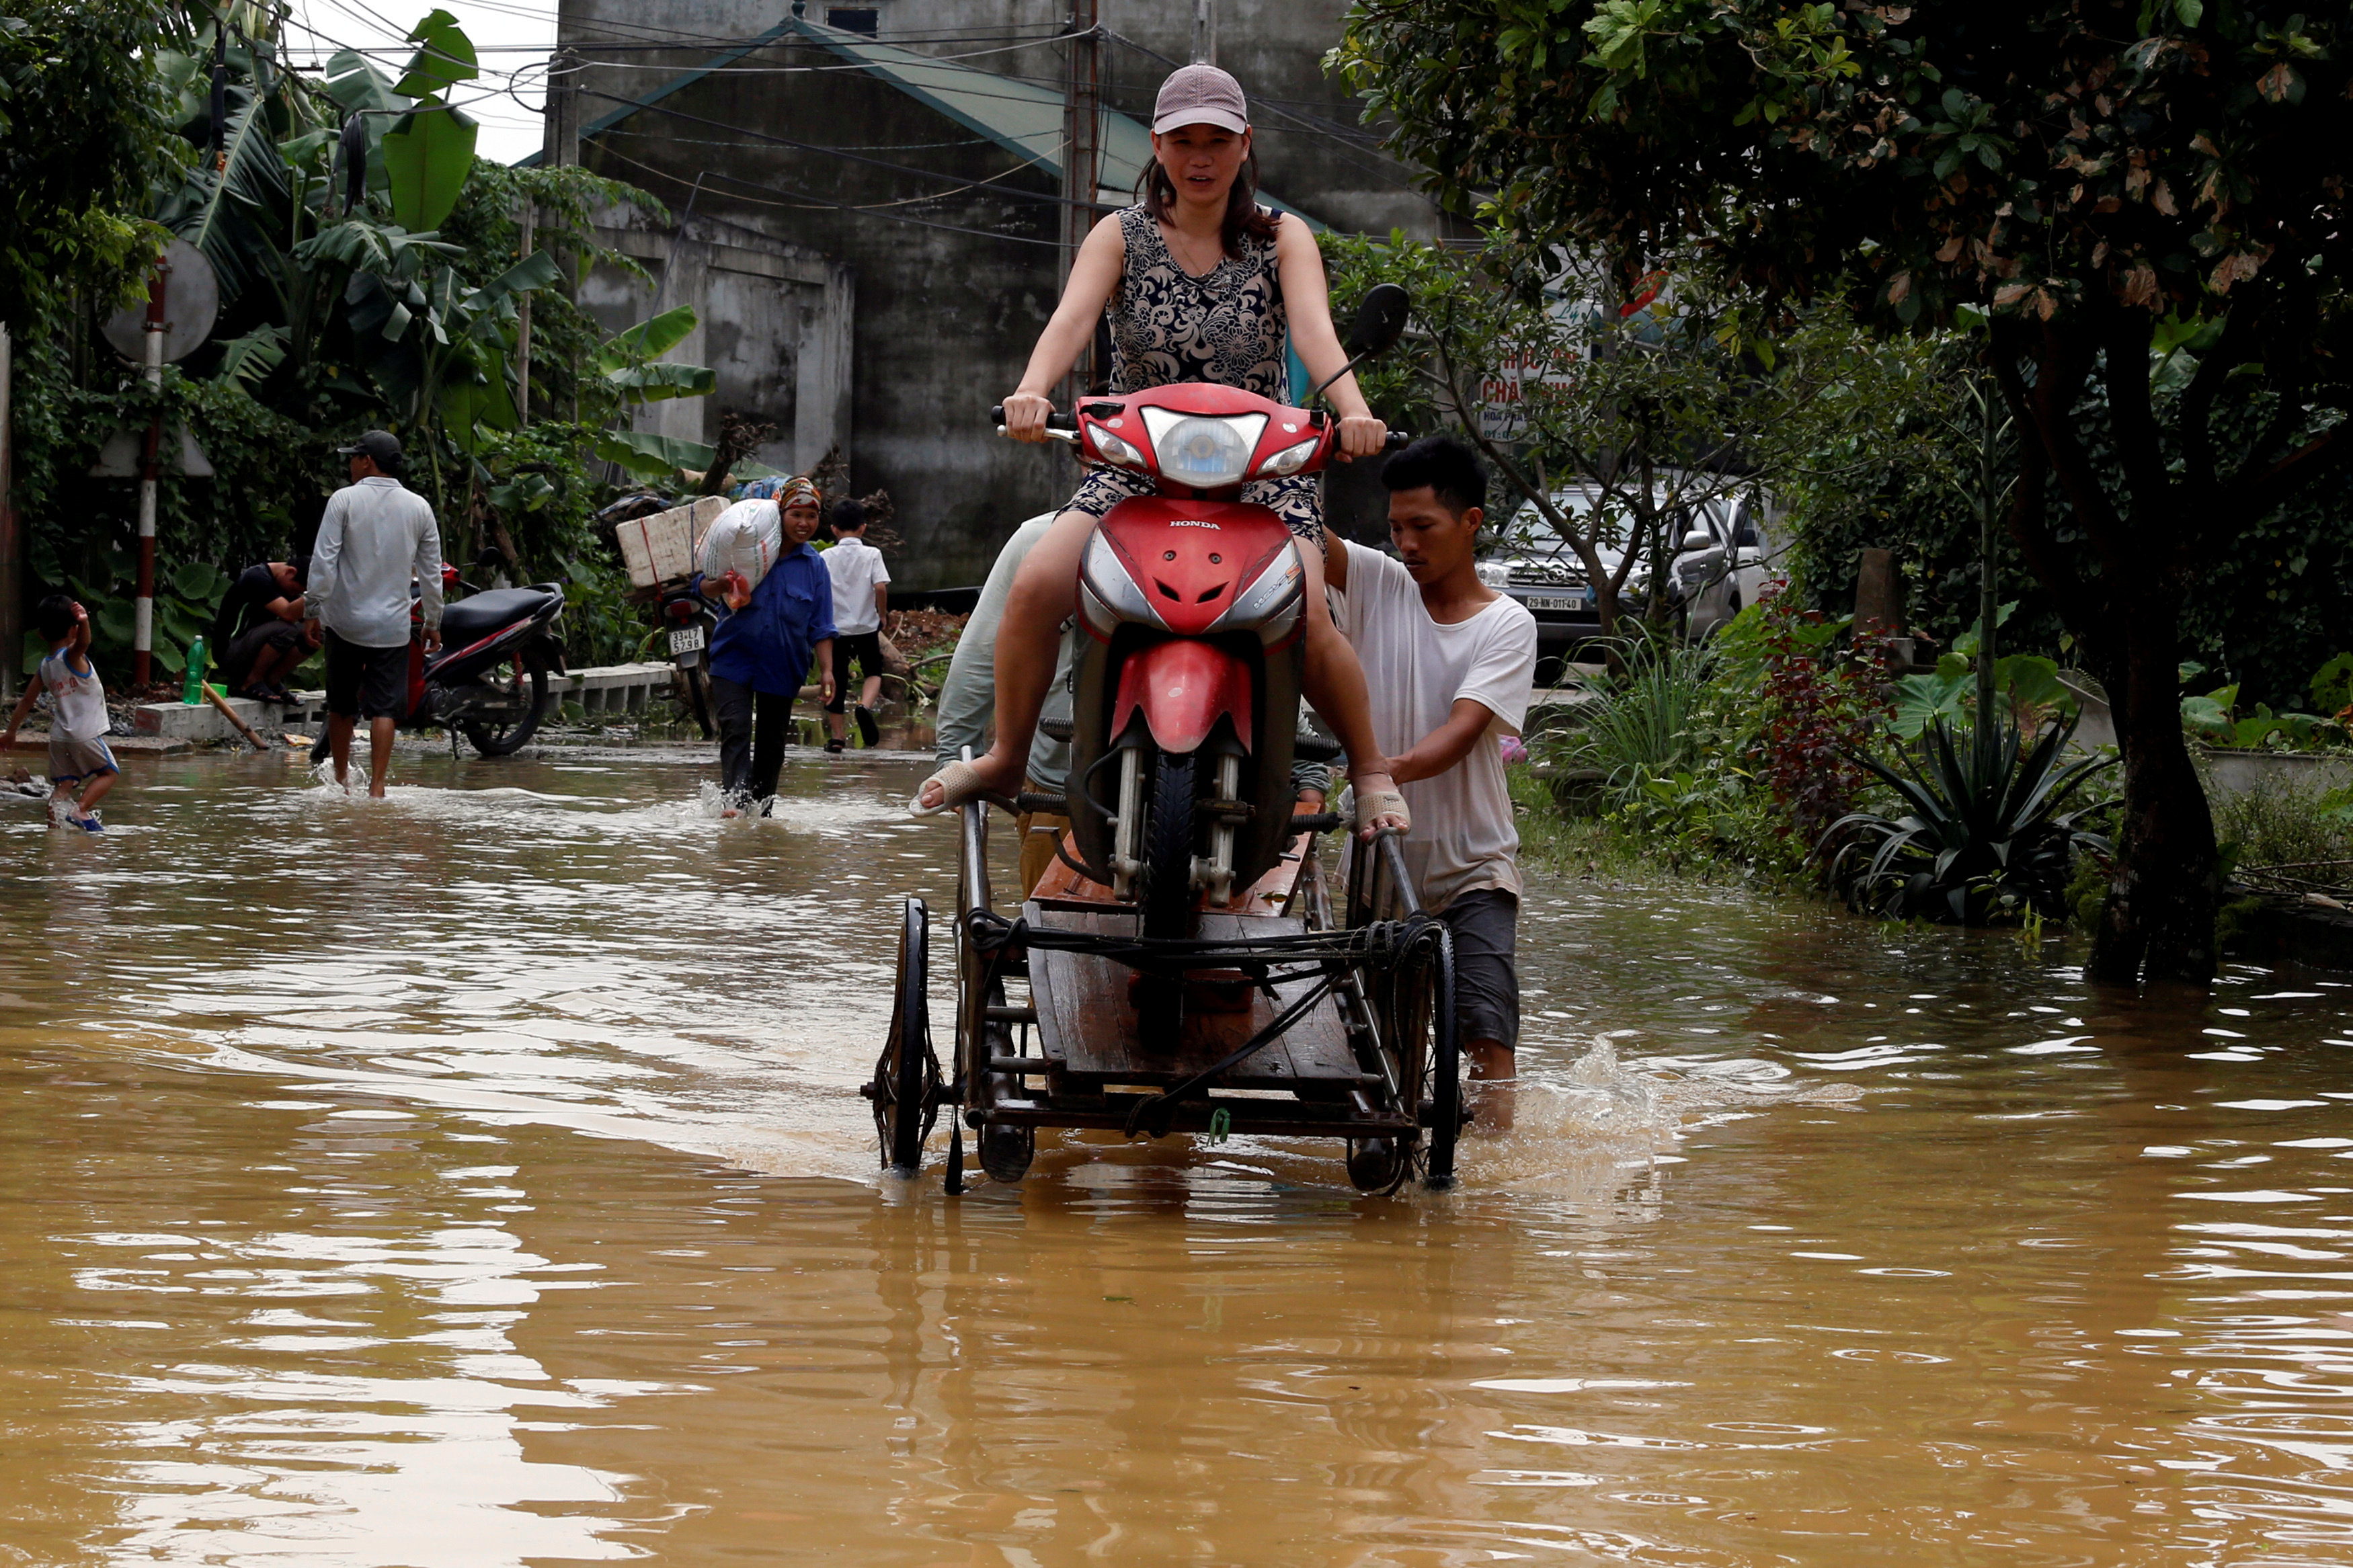 Men evacuate a woman through a flooded road after a tropical depression in Hanoi, Vietnam October 13, 2017. Photo: Reuters